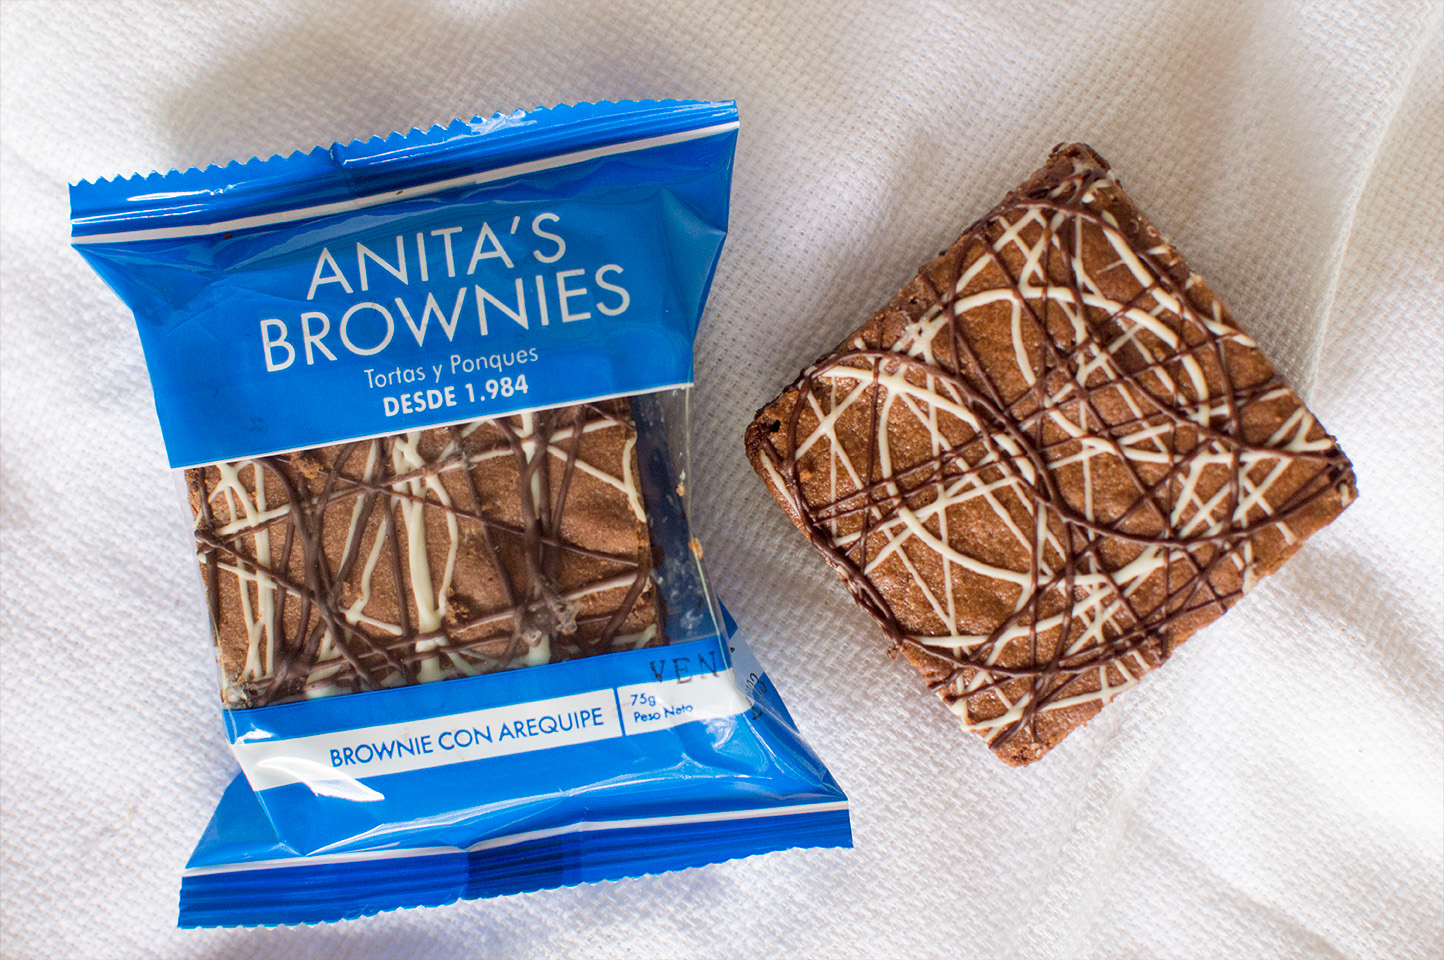 Foto-Brownies-con-arequipe